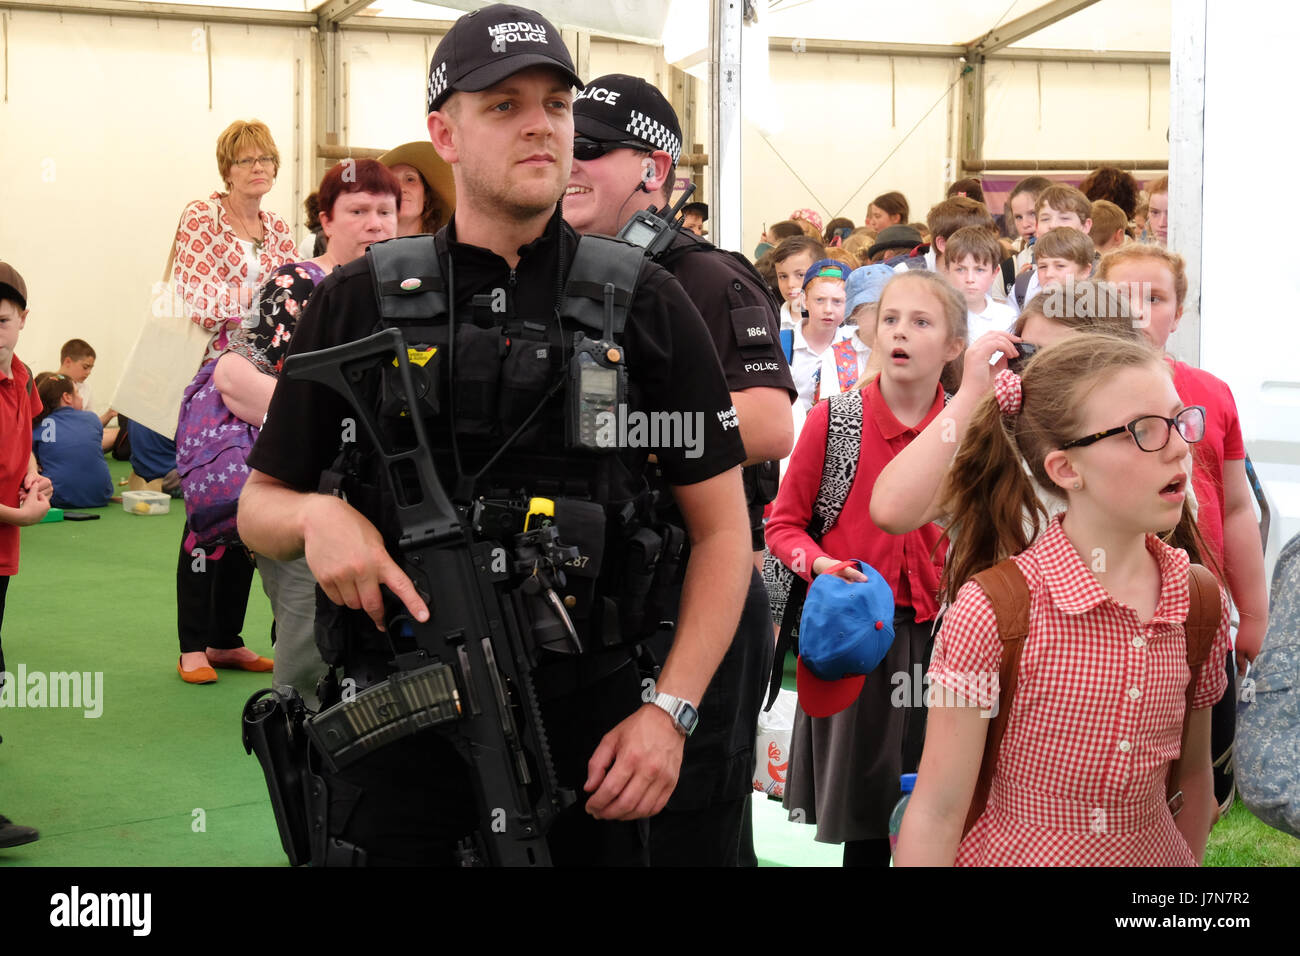 Hay Festival 2017 - Hay on Wye, Wales, UK - May 2017 - Armed police officers patrol the  opening day of this years Hay Festival which celebrates its 30th anniversary in 2017. Over 3,000 primary school children will attend Day 1 of the literary festival that runs until June 4th.  Steven May / Alamy Live News Stock Photo